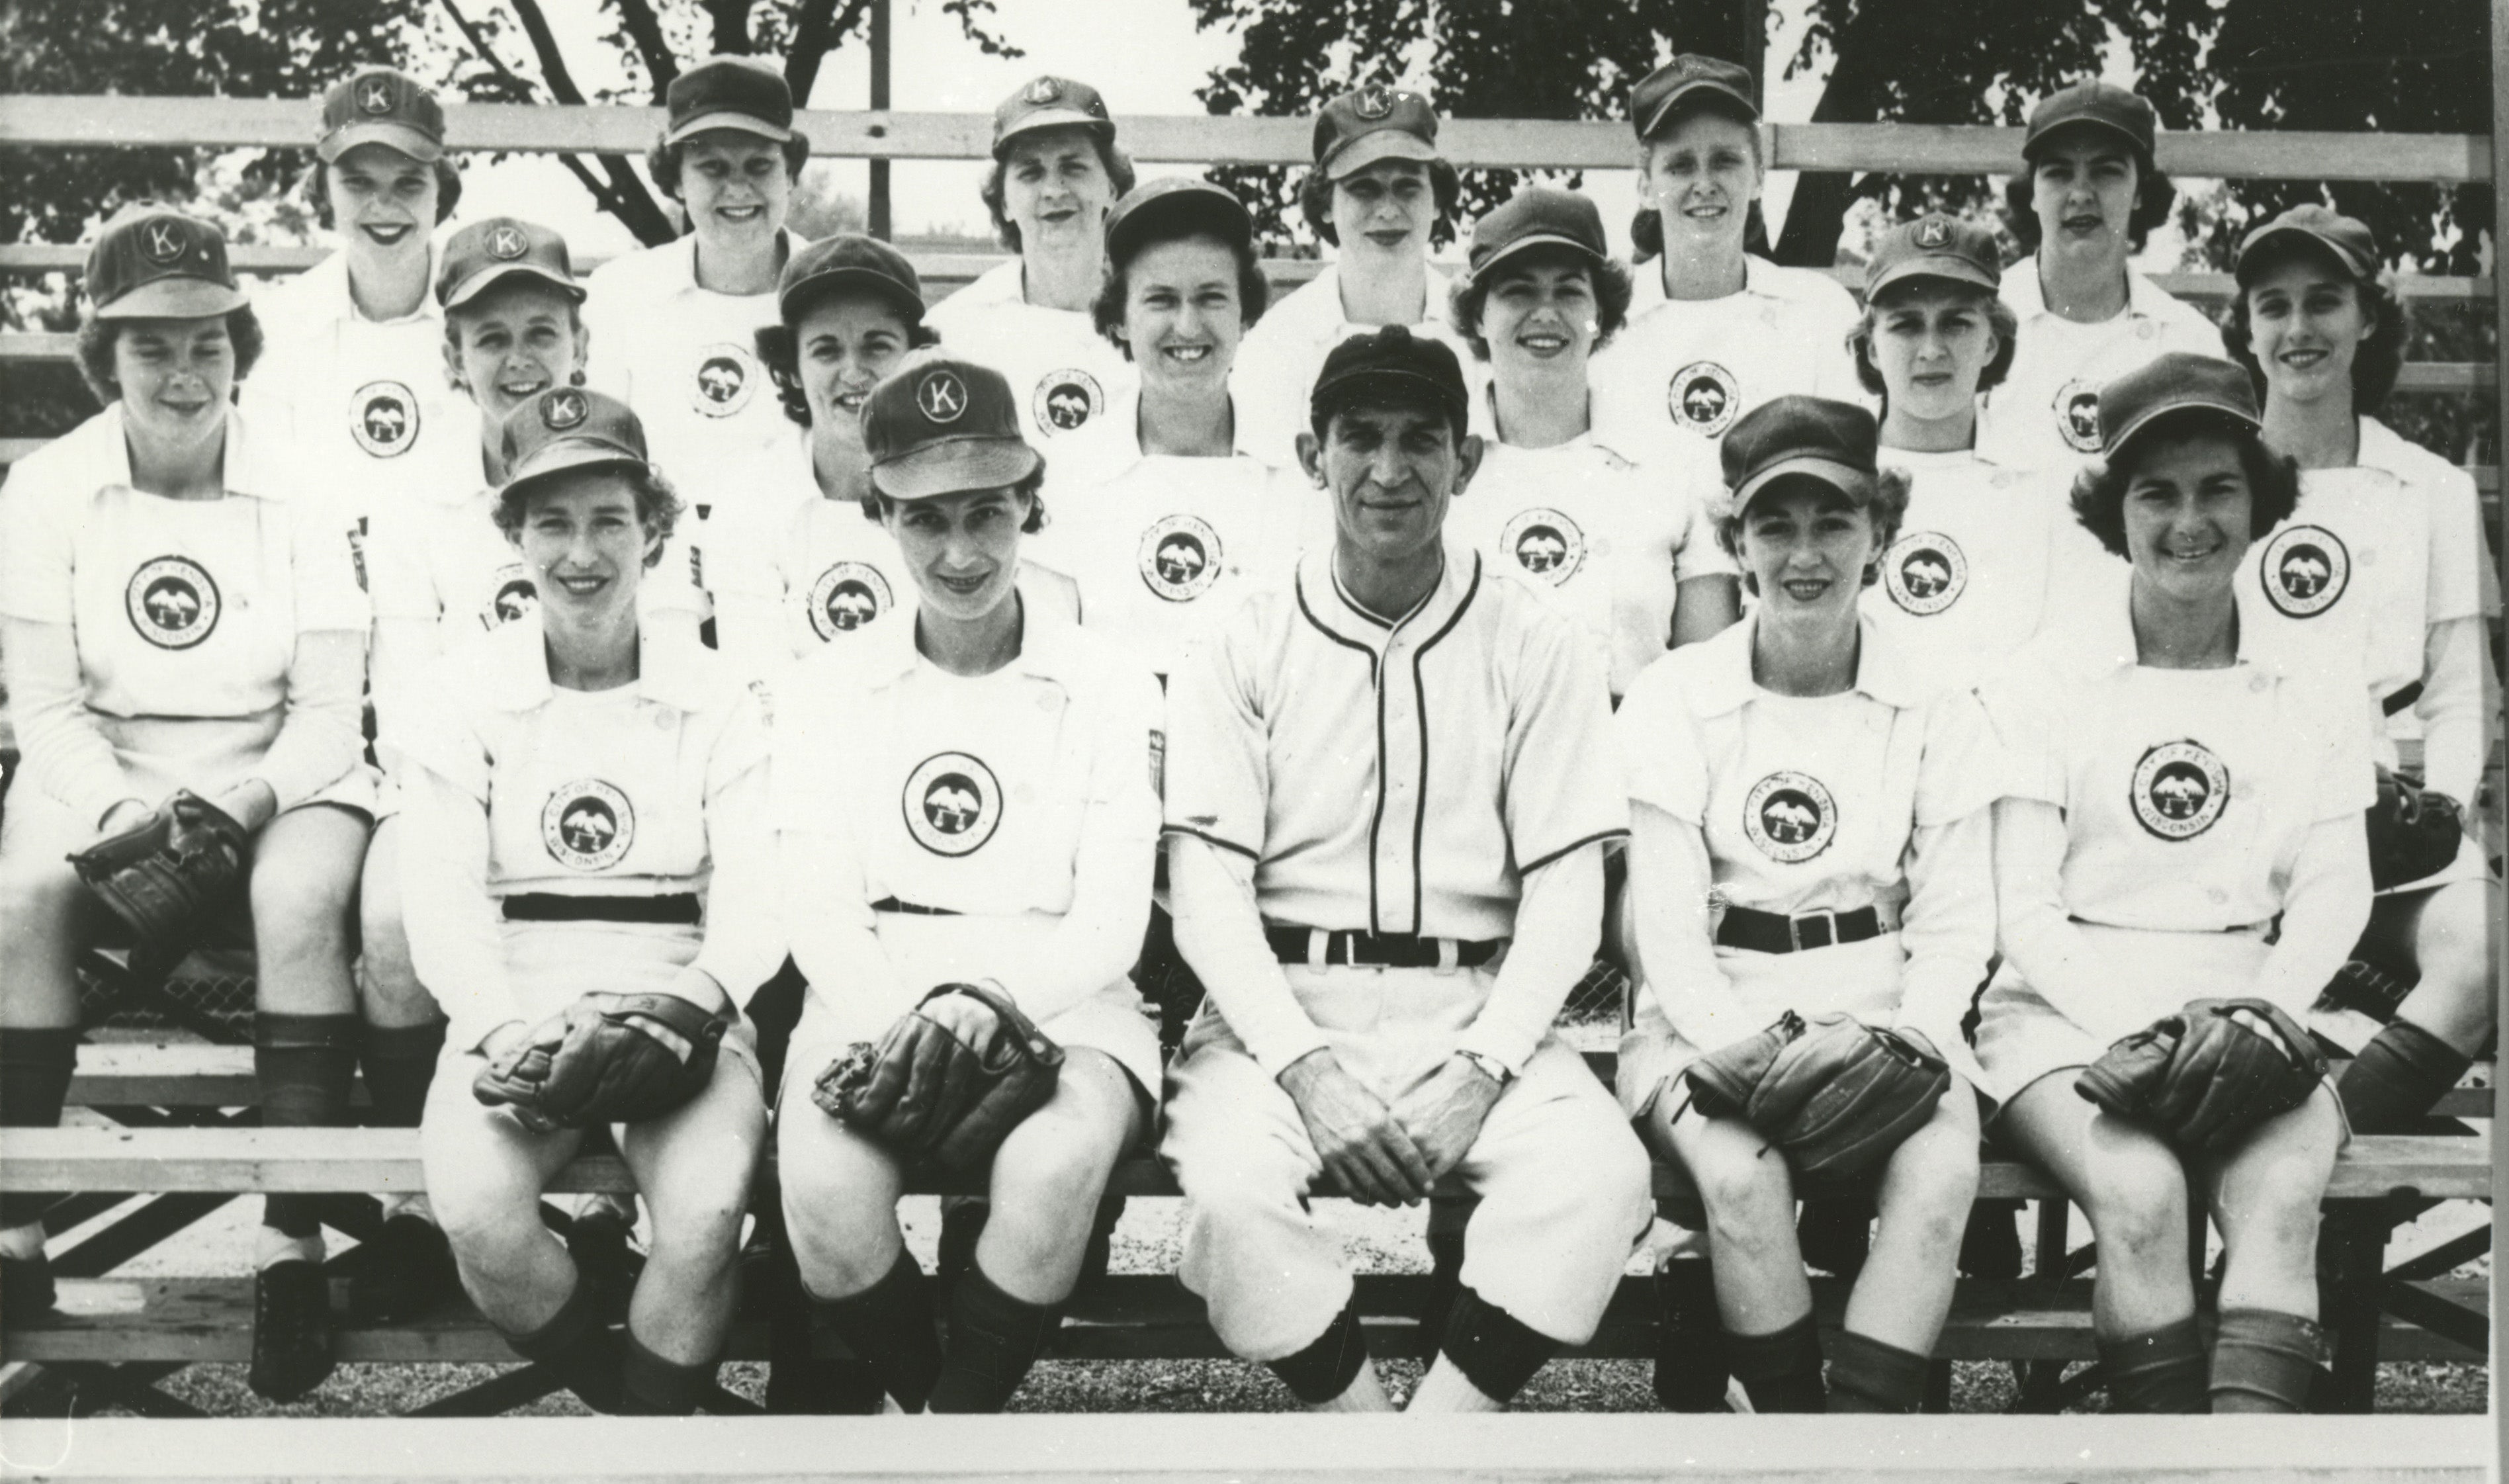 A Hockey Hero and the AAGPBL